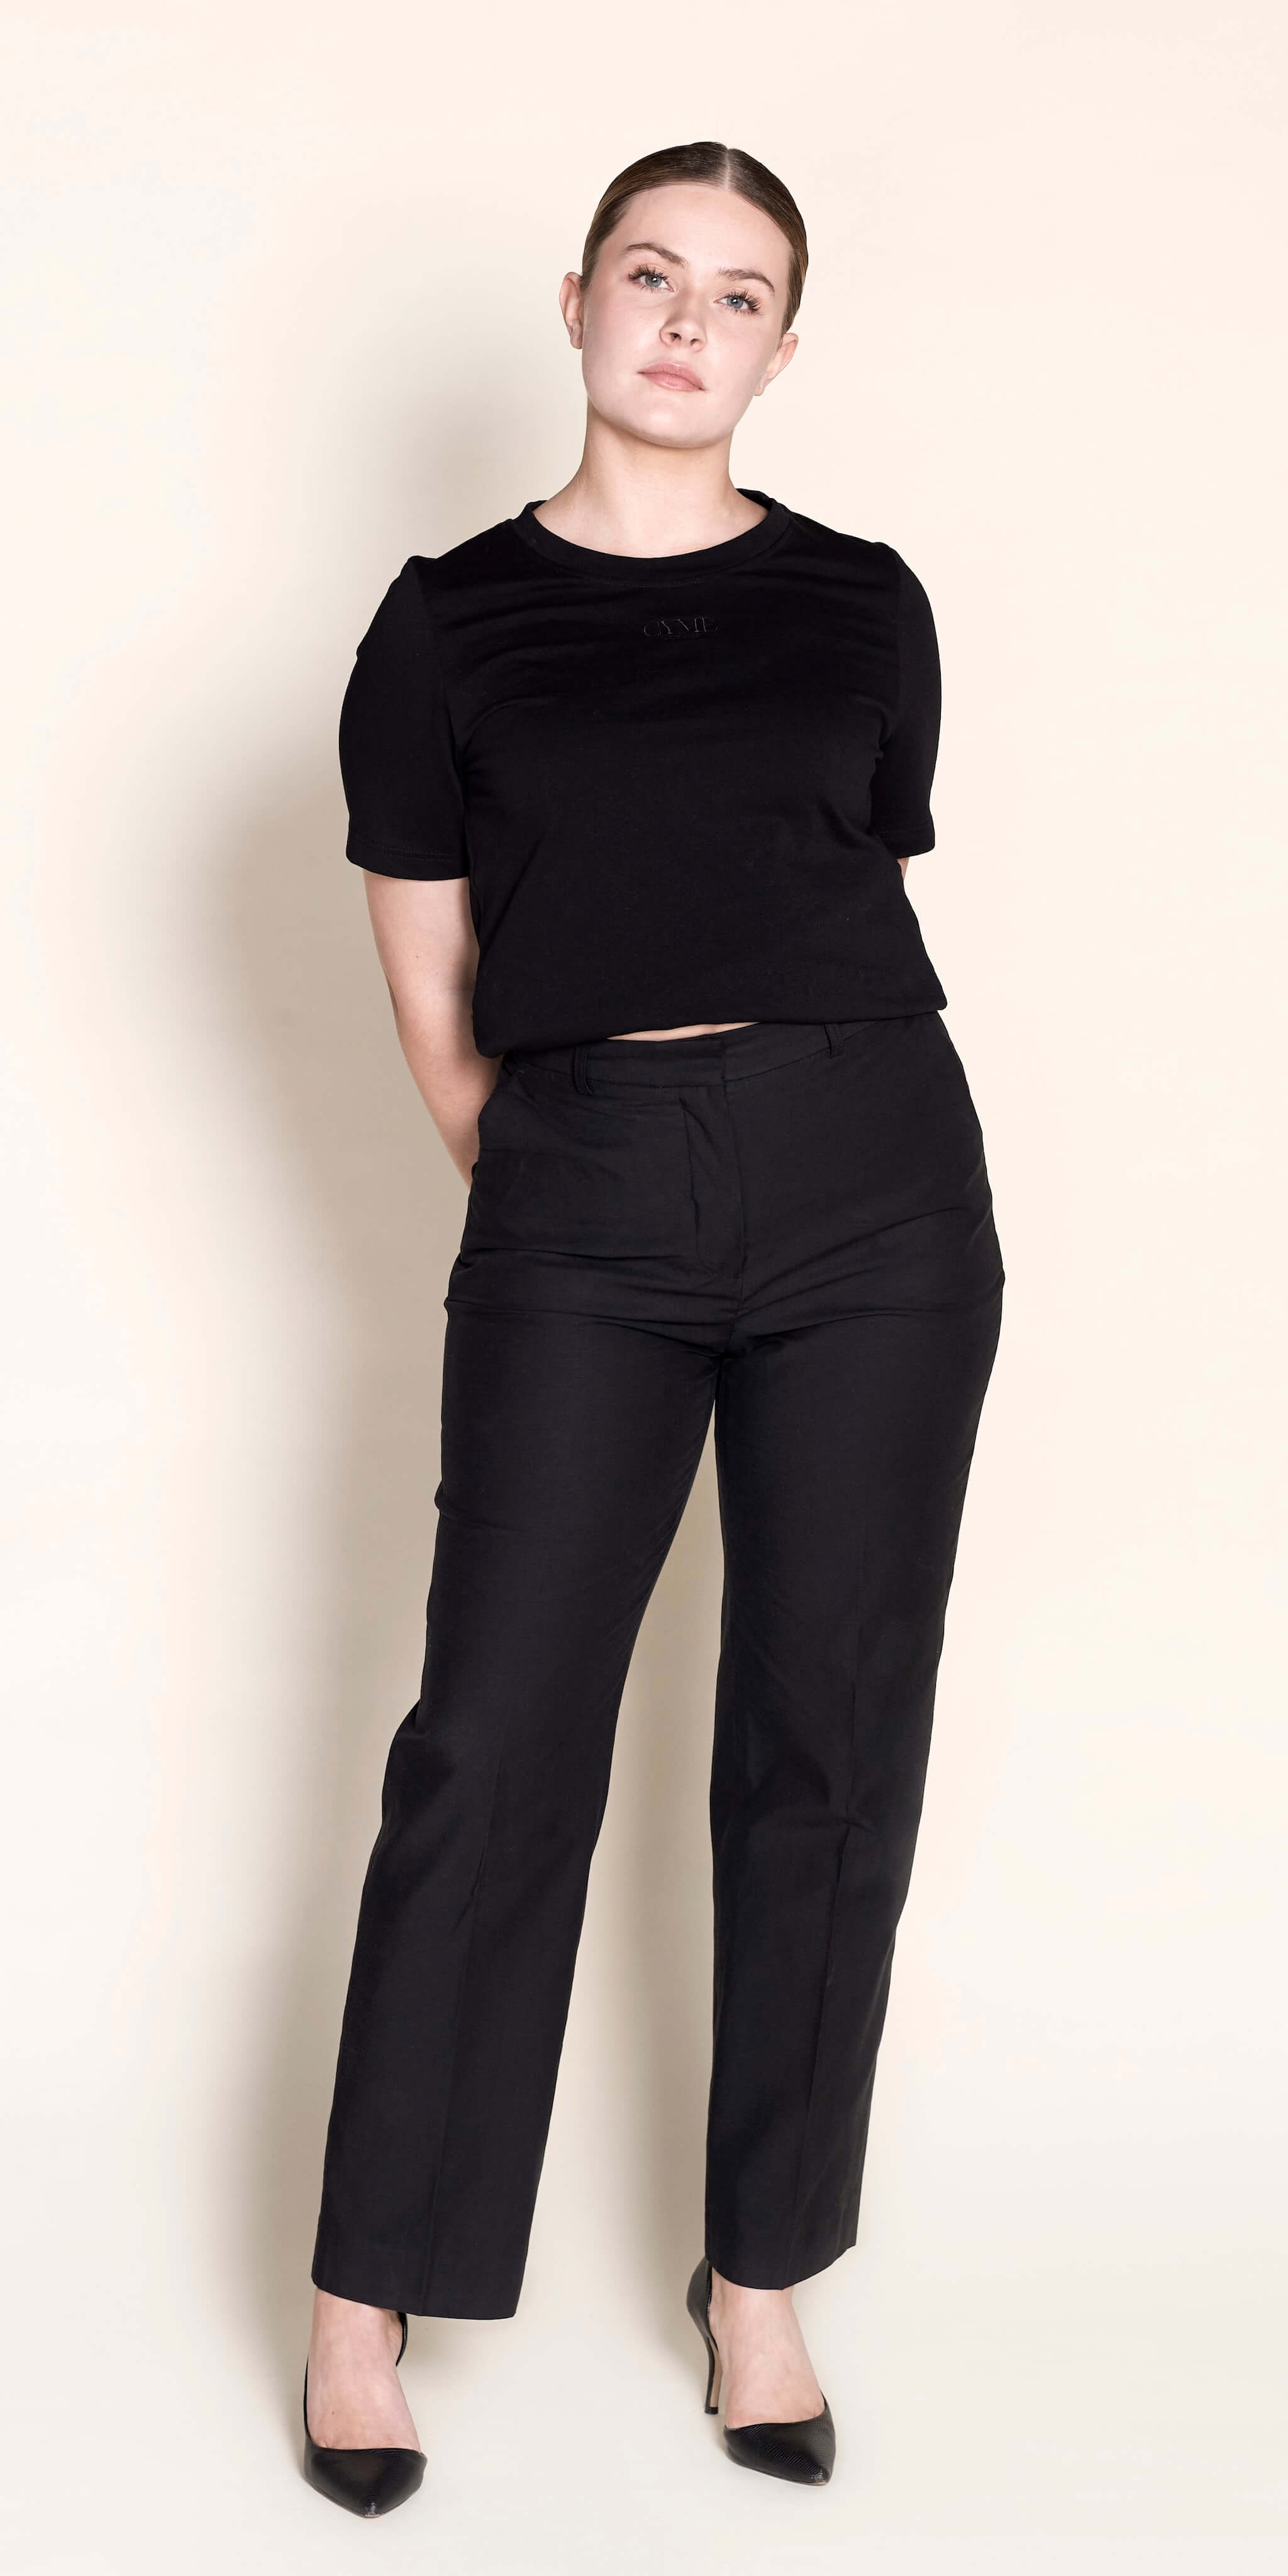 A model confidently wears a Cyme Copenhagen classic black trousers with a chic black cropped top composed with lyocell, highlighting the brand's flair for combining sustainable fashion with timeless Scandinavian design.